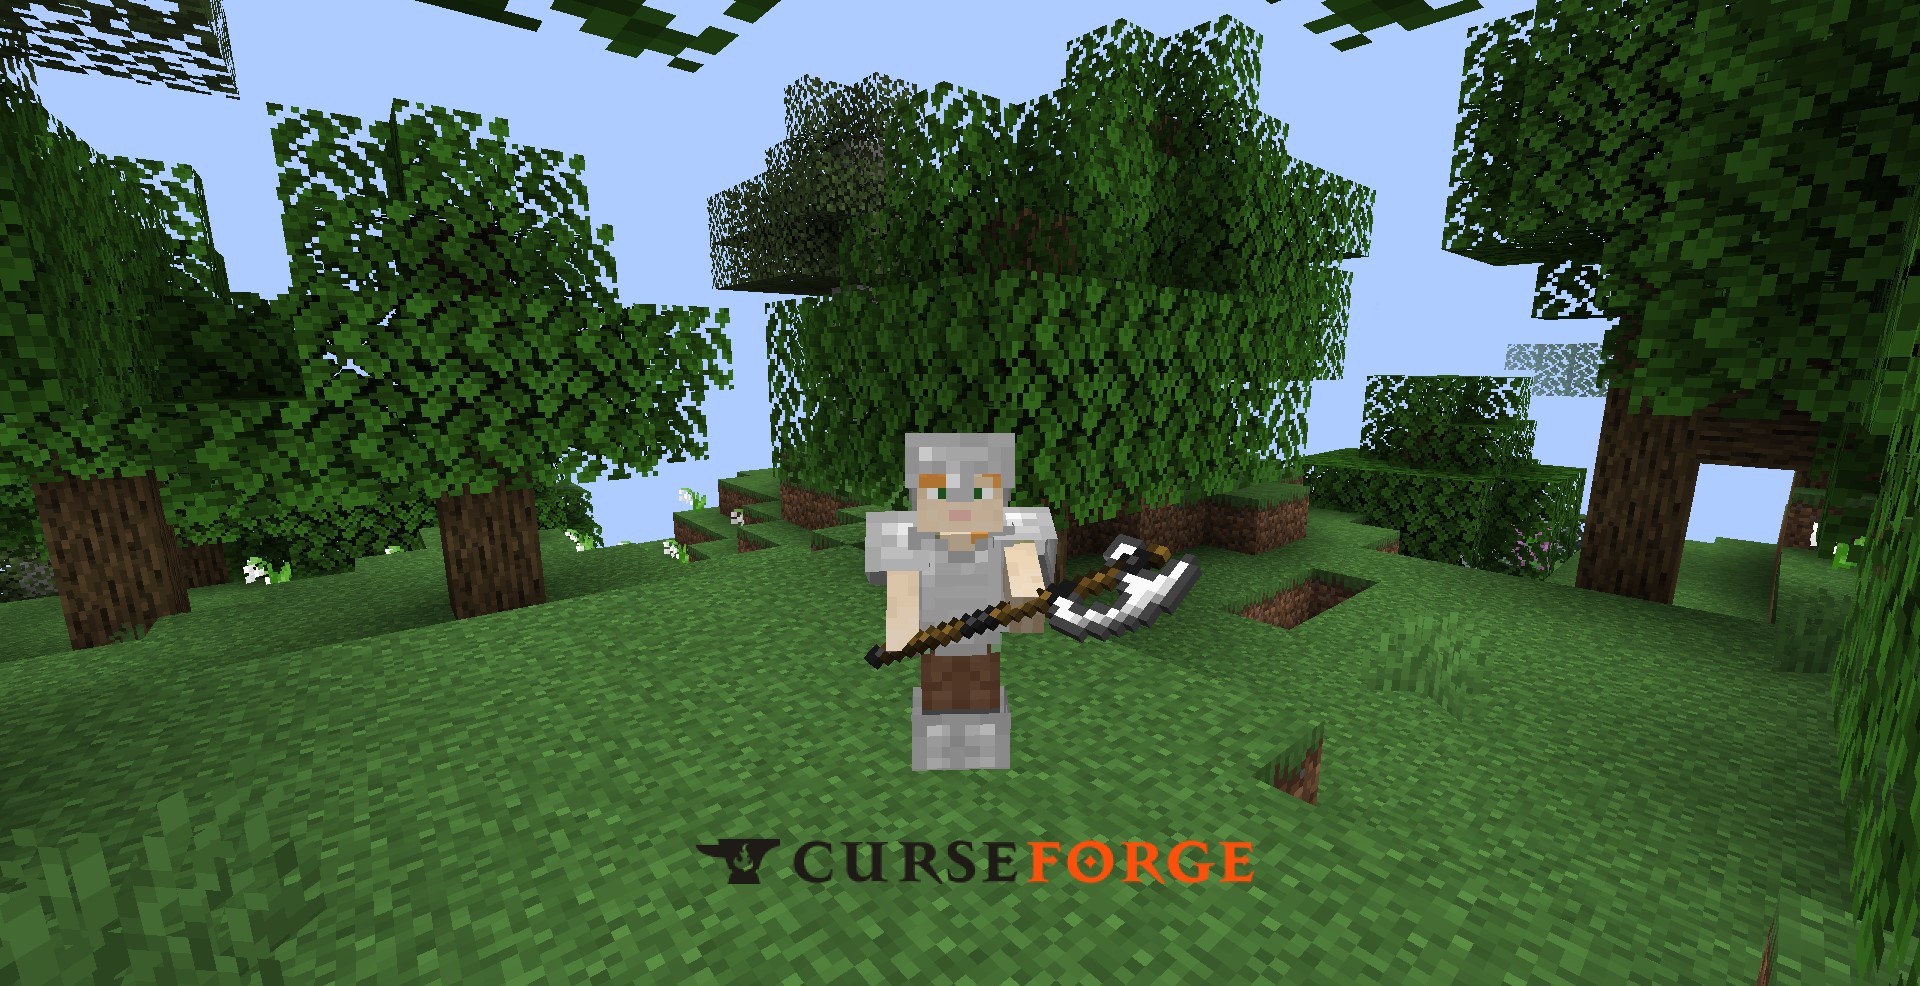 download curseforge for free